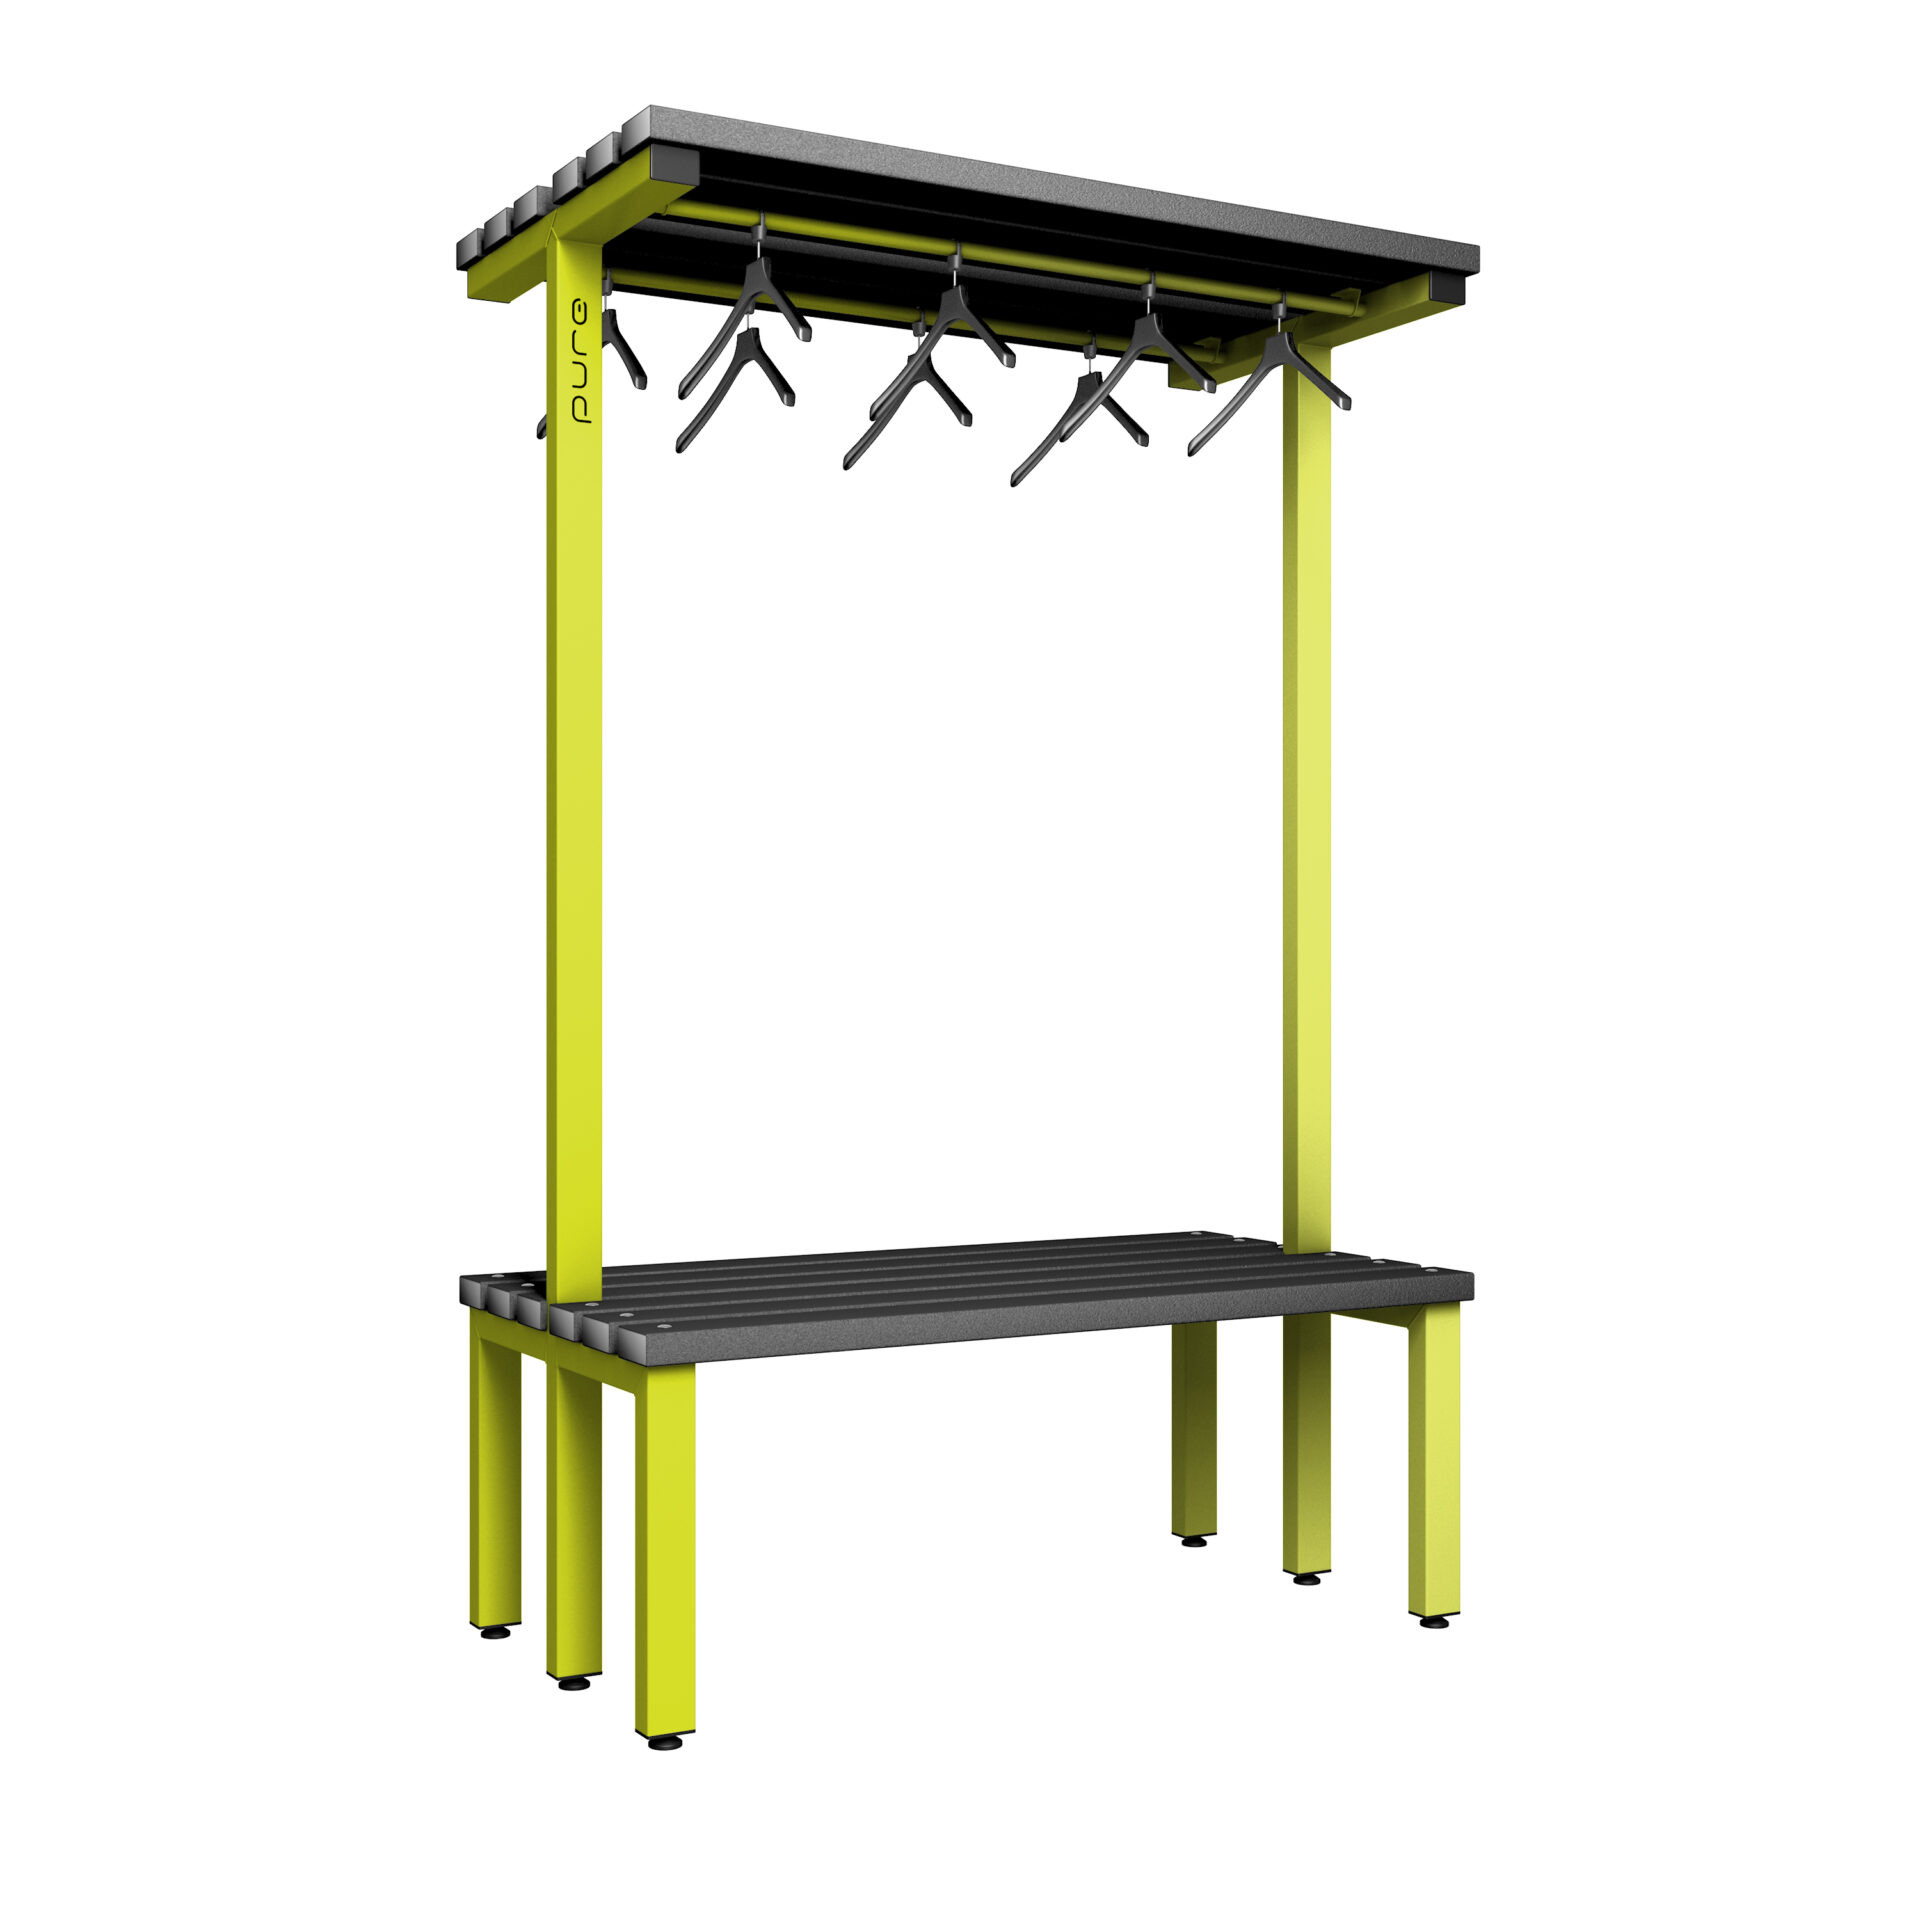 Pure Carbon Zero Double Sided 1200mm Overhead Hanging Bench